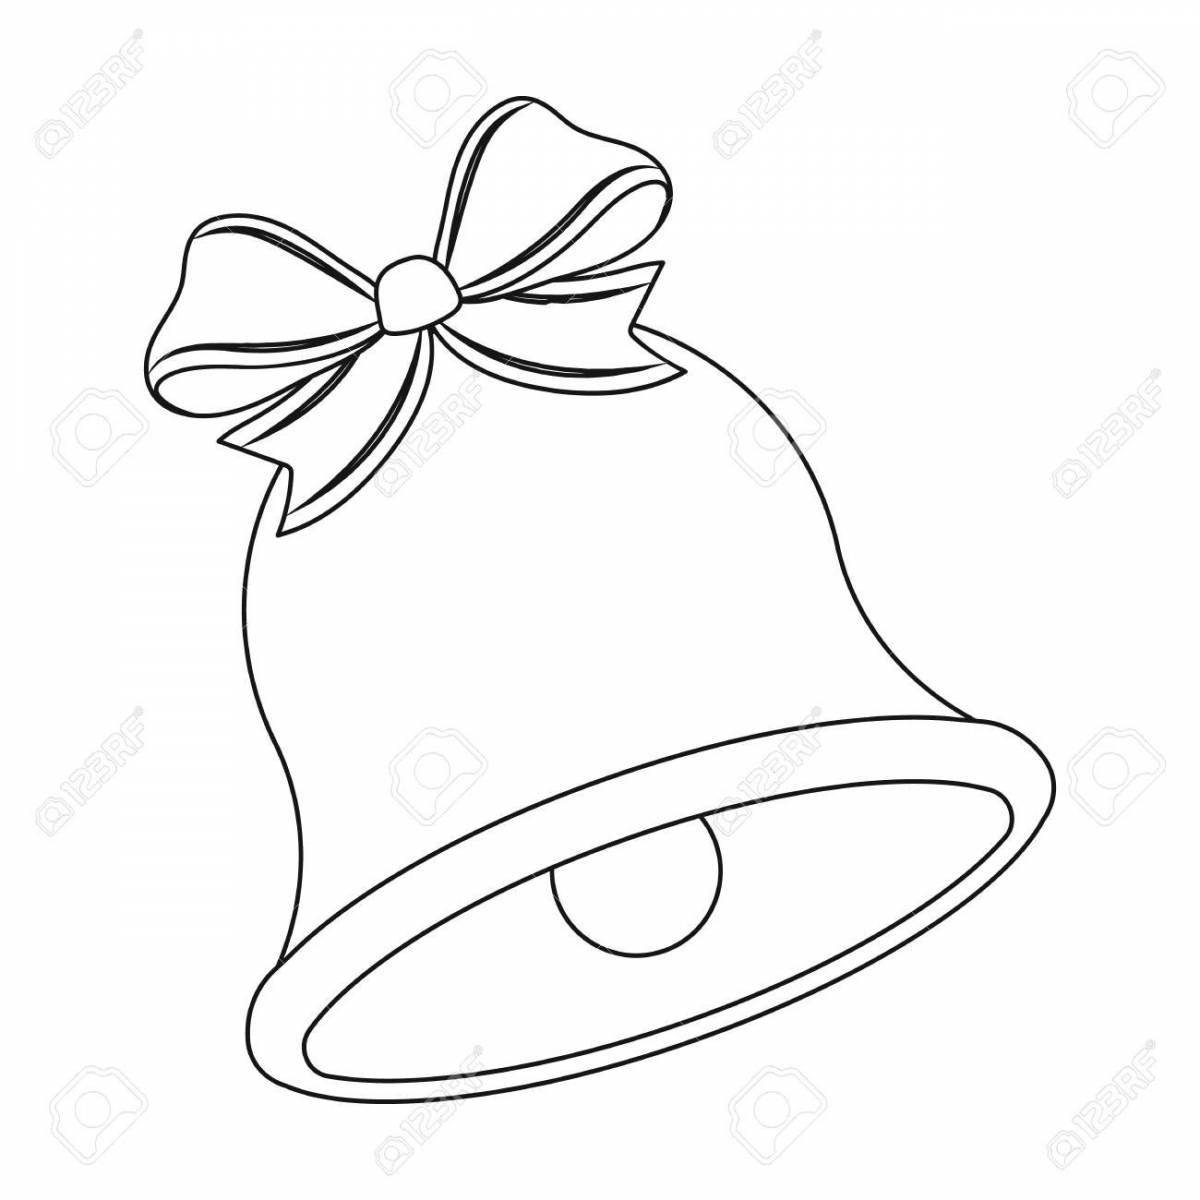 Coloring page shiny school bell